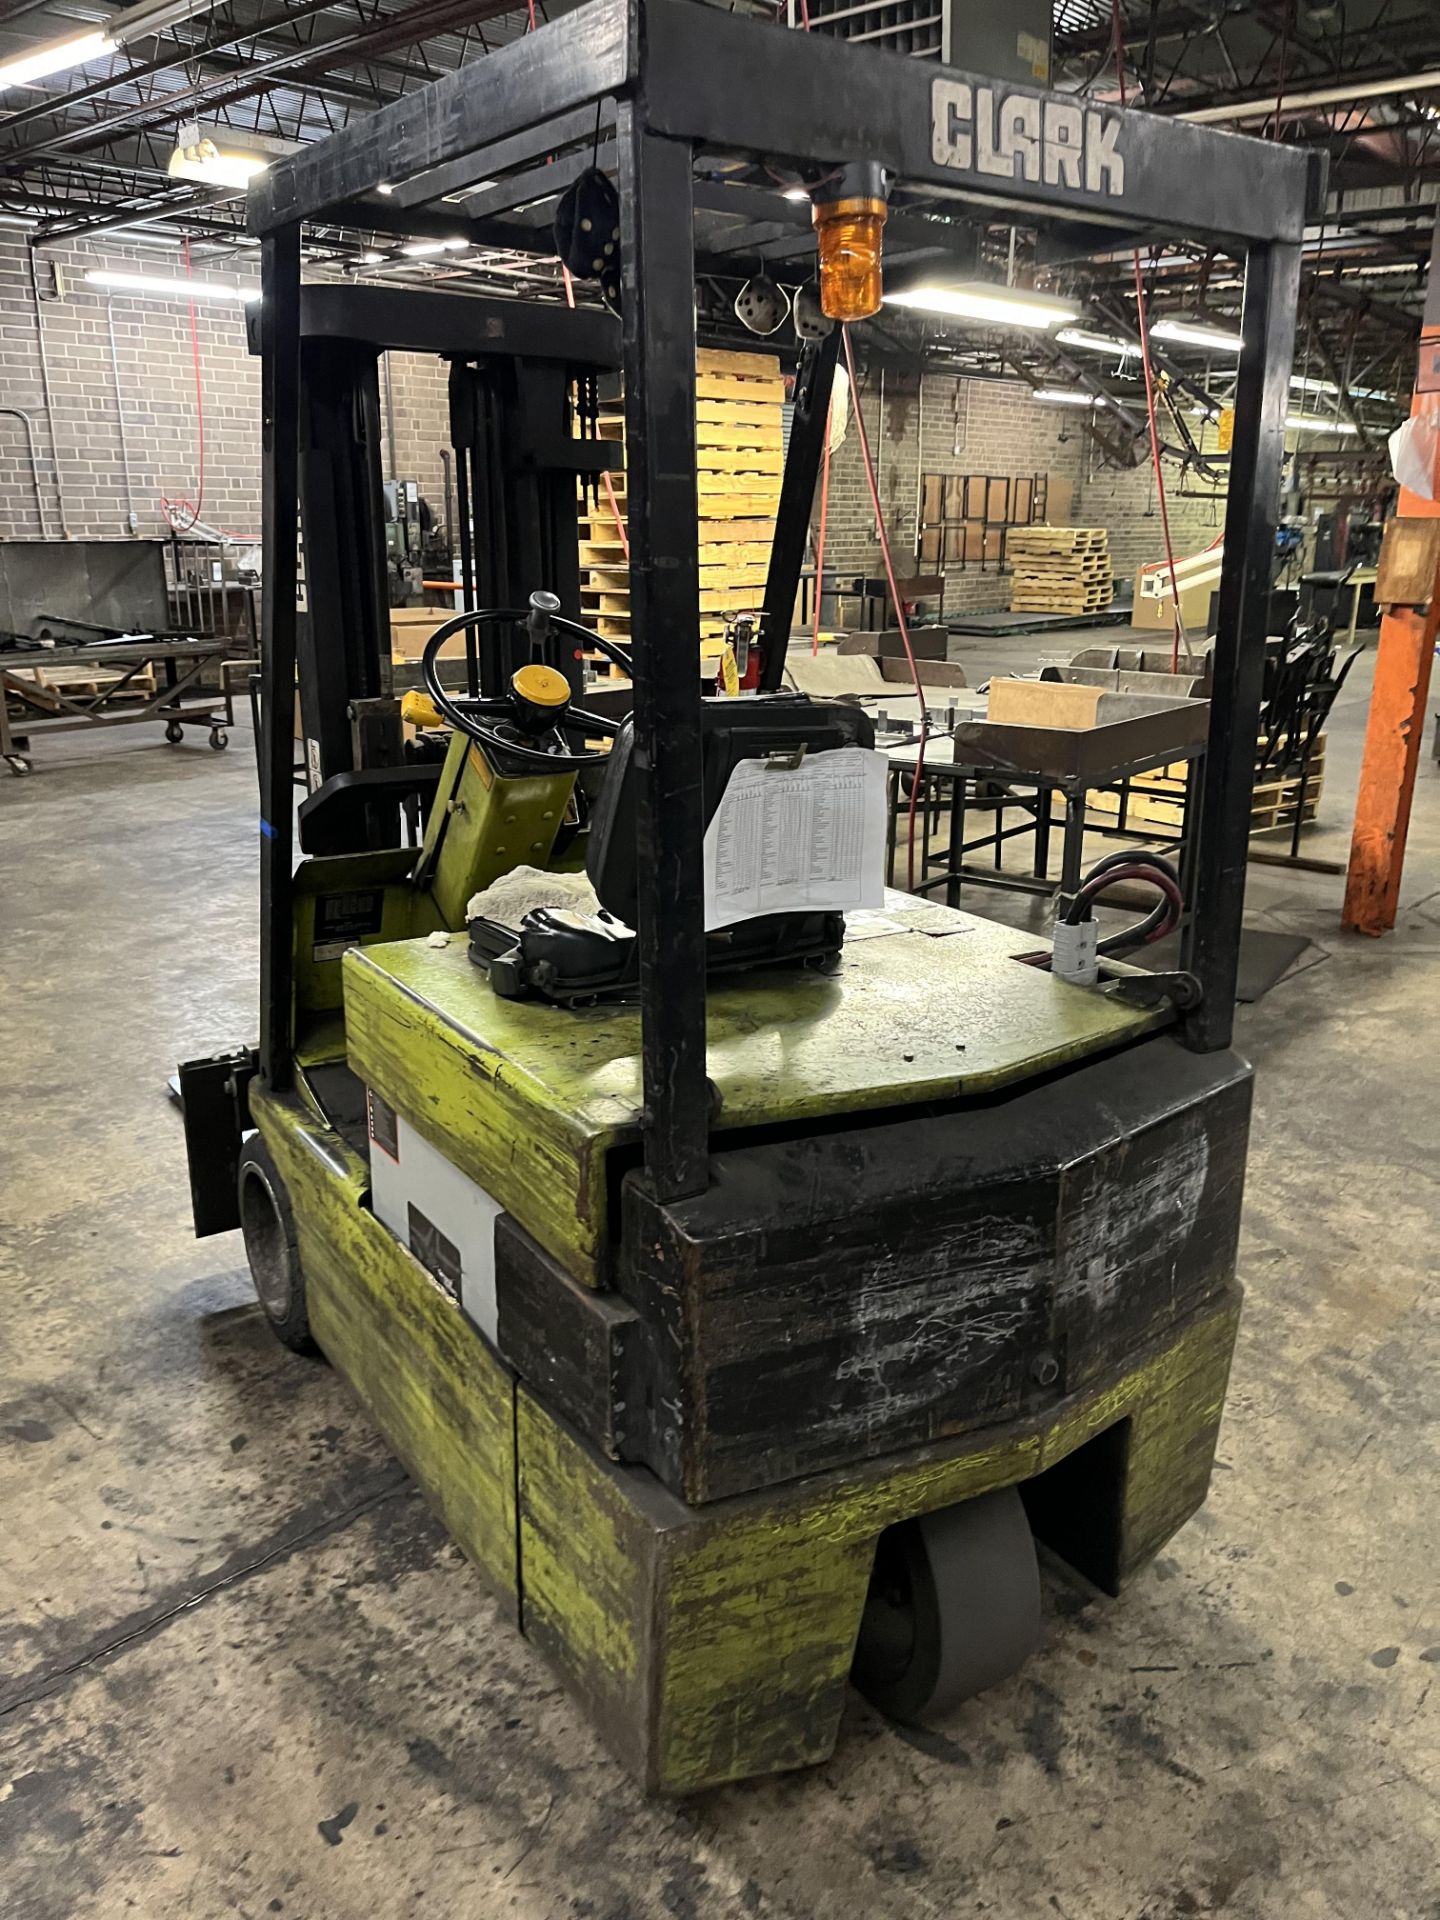 Clark TM20 3,750-Lb Electric Forklift Truck (DELAYED DELIVERY - Available January 13, 2023) - Image 2 of 4